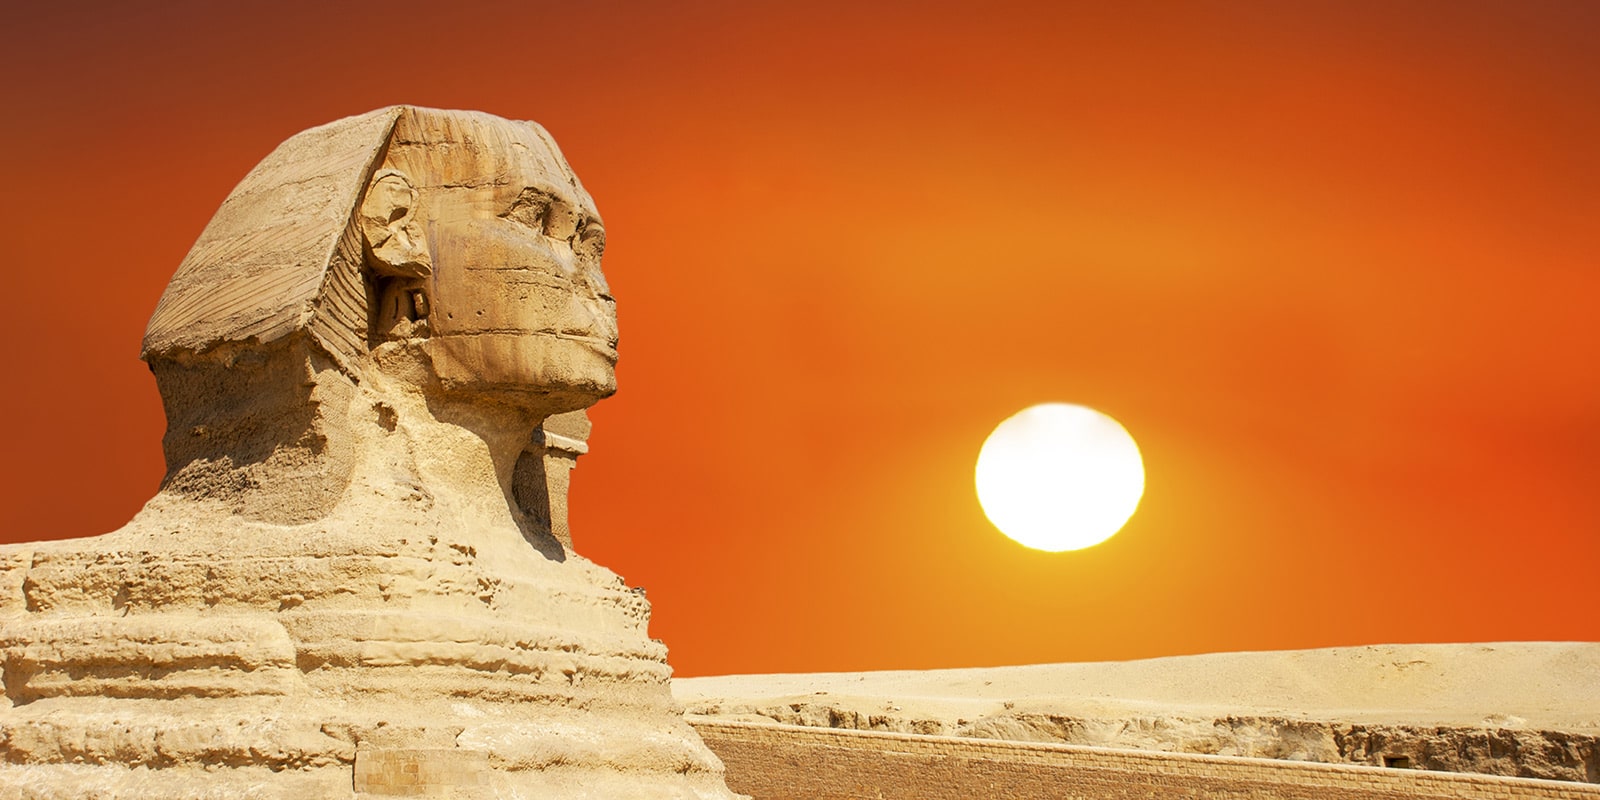 Africa and the Sphinx at Giza in Cairo, Egypt (Wisconsinart/Dreamstime)